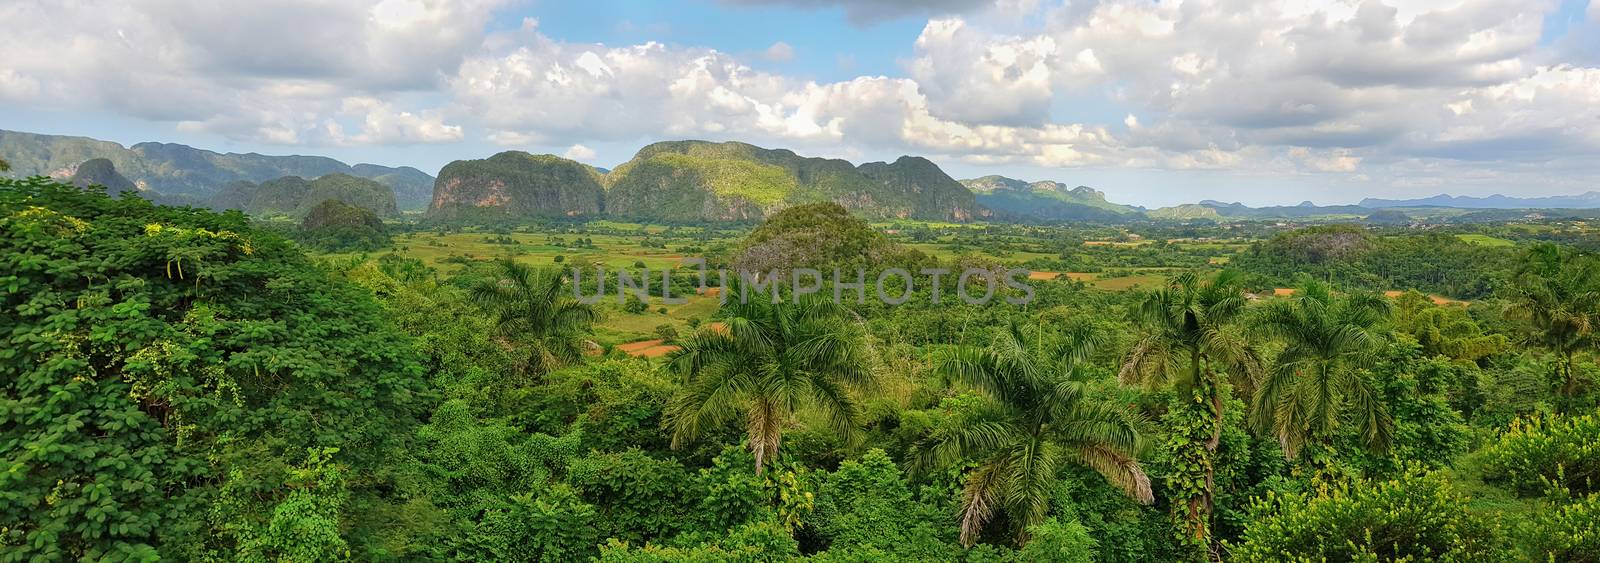 Panoramic view of Cuban green rain forest  by Mendelex